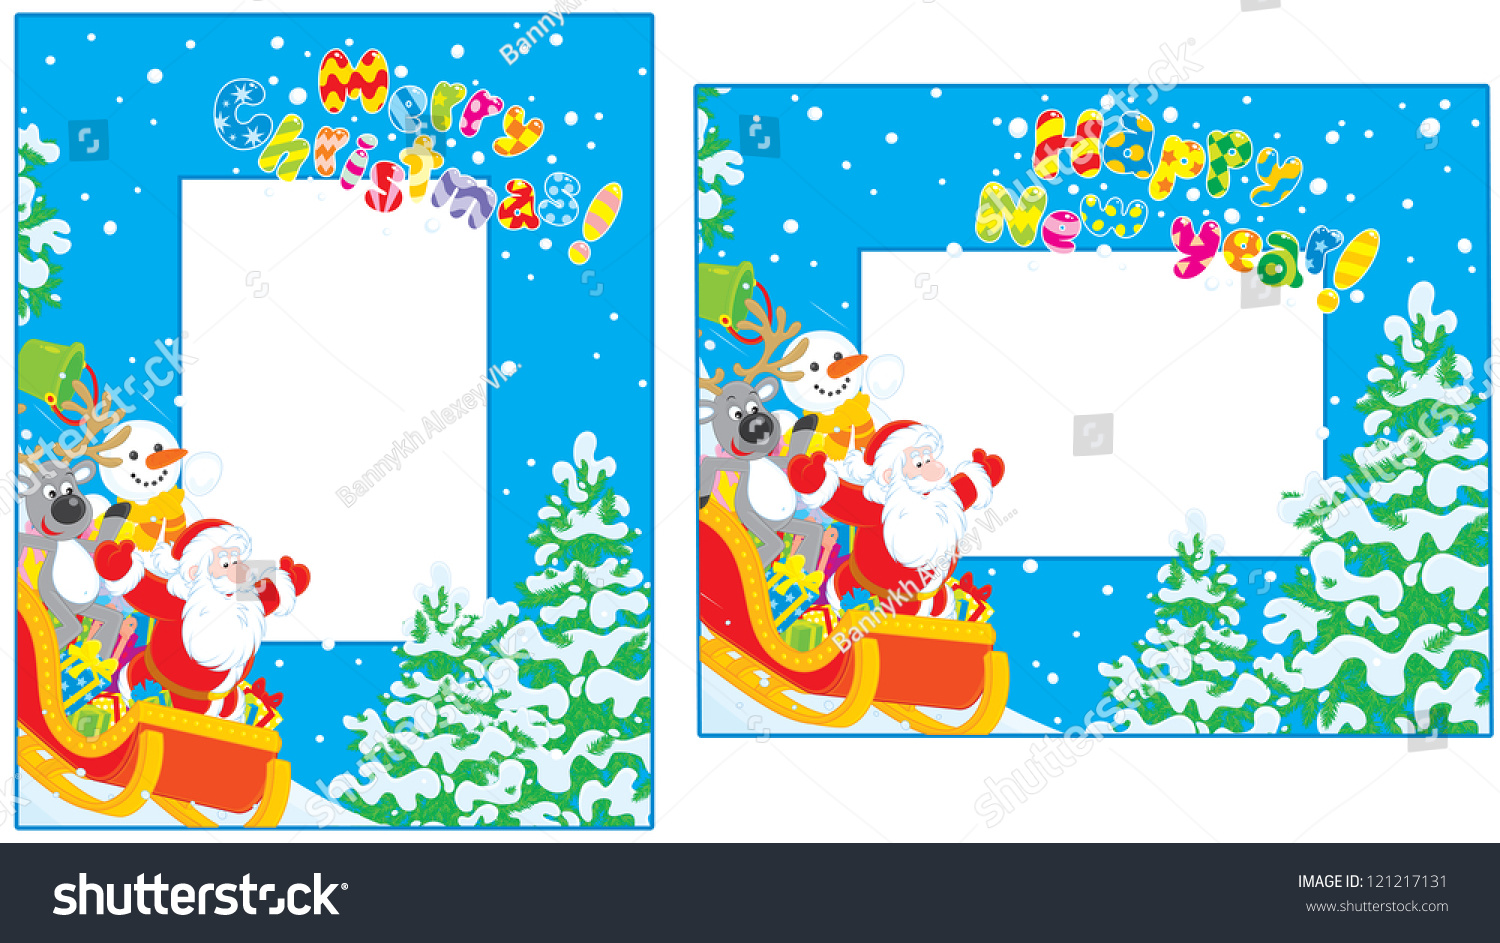 Borders With Santa Claus, Reindeer And Snowman Sliding Down In Their ...